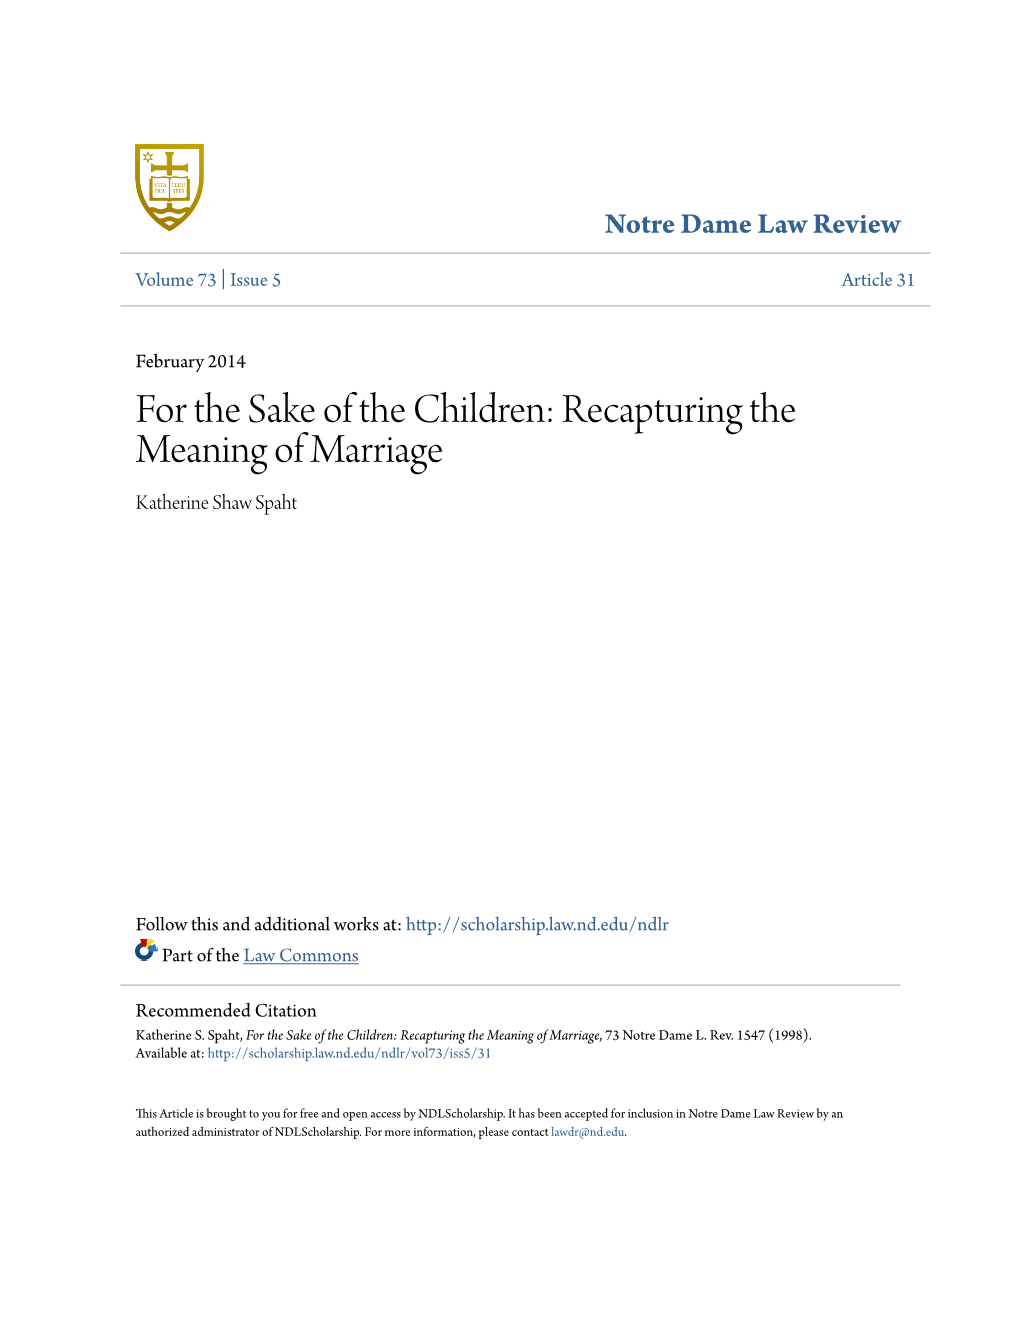 For the Sake of the Children: Recapturing the Meaning of Marriage Katherine Shaw Spaht